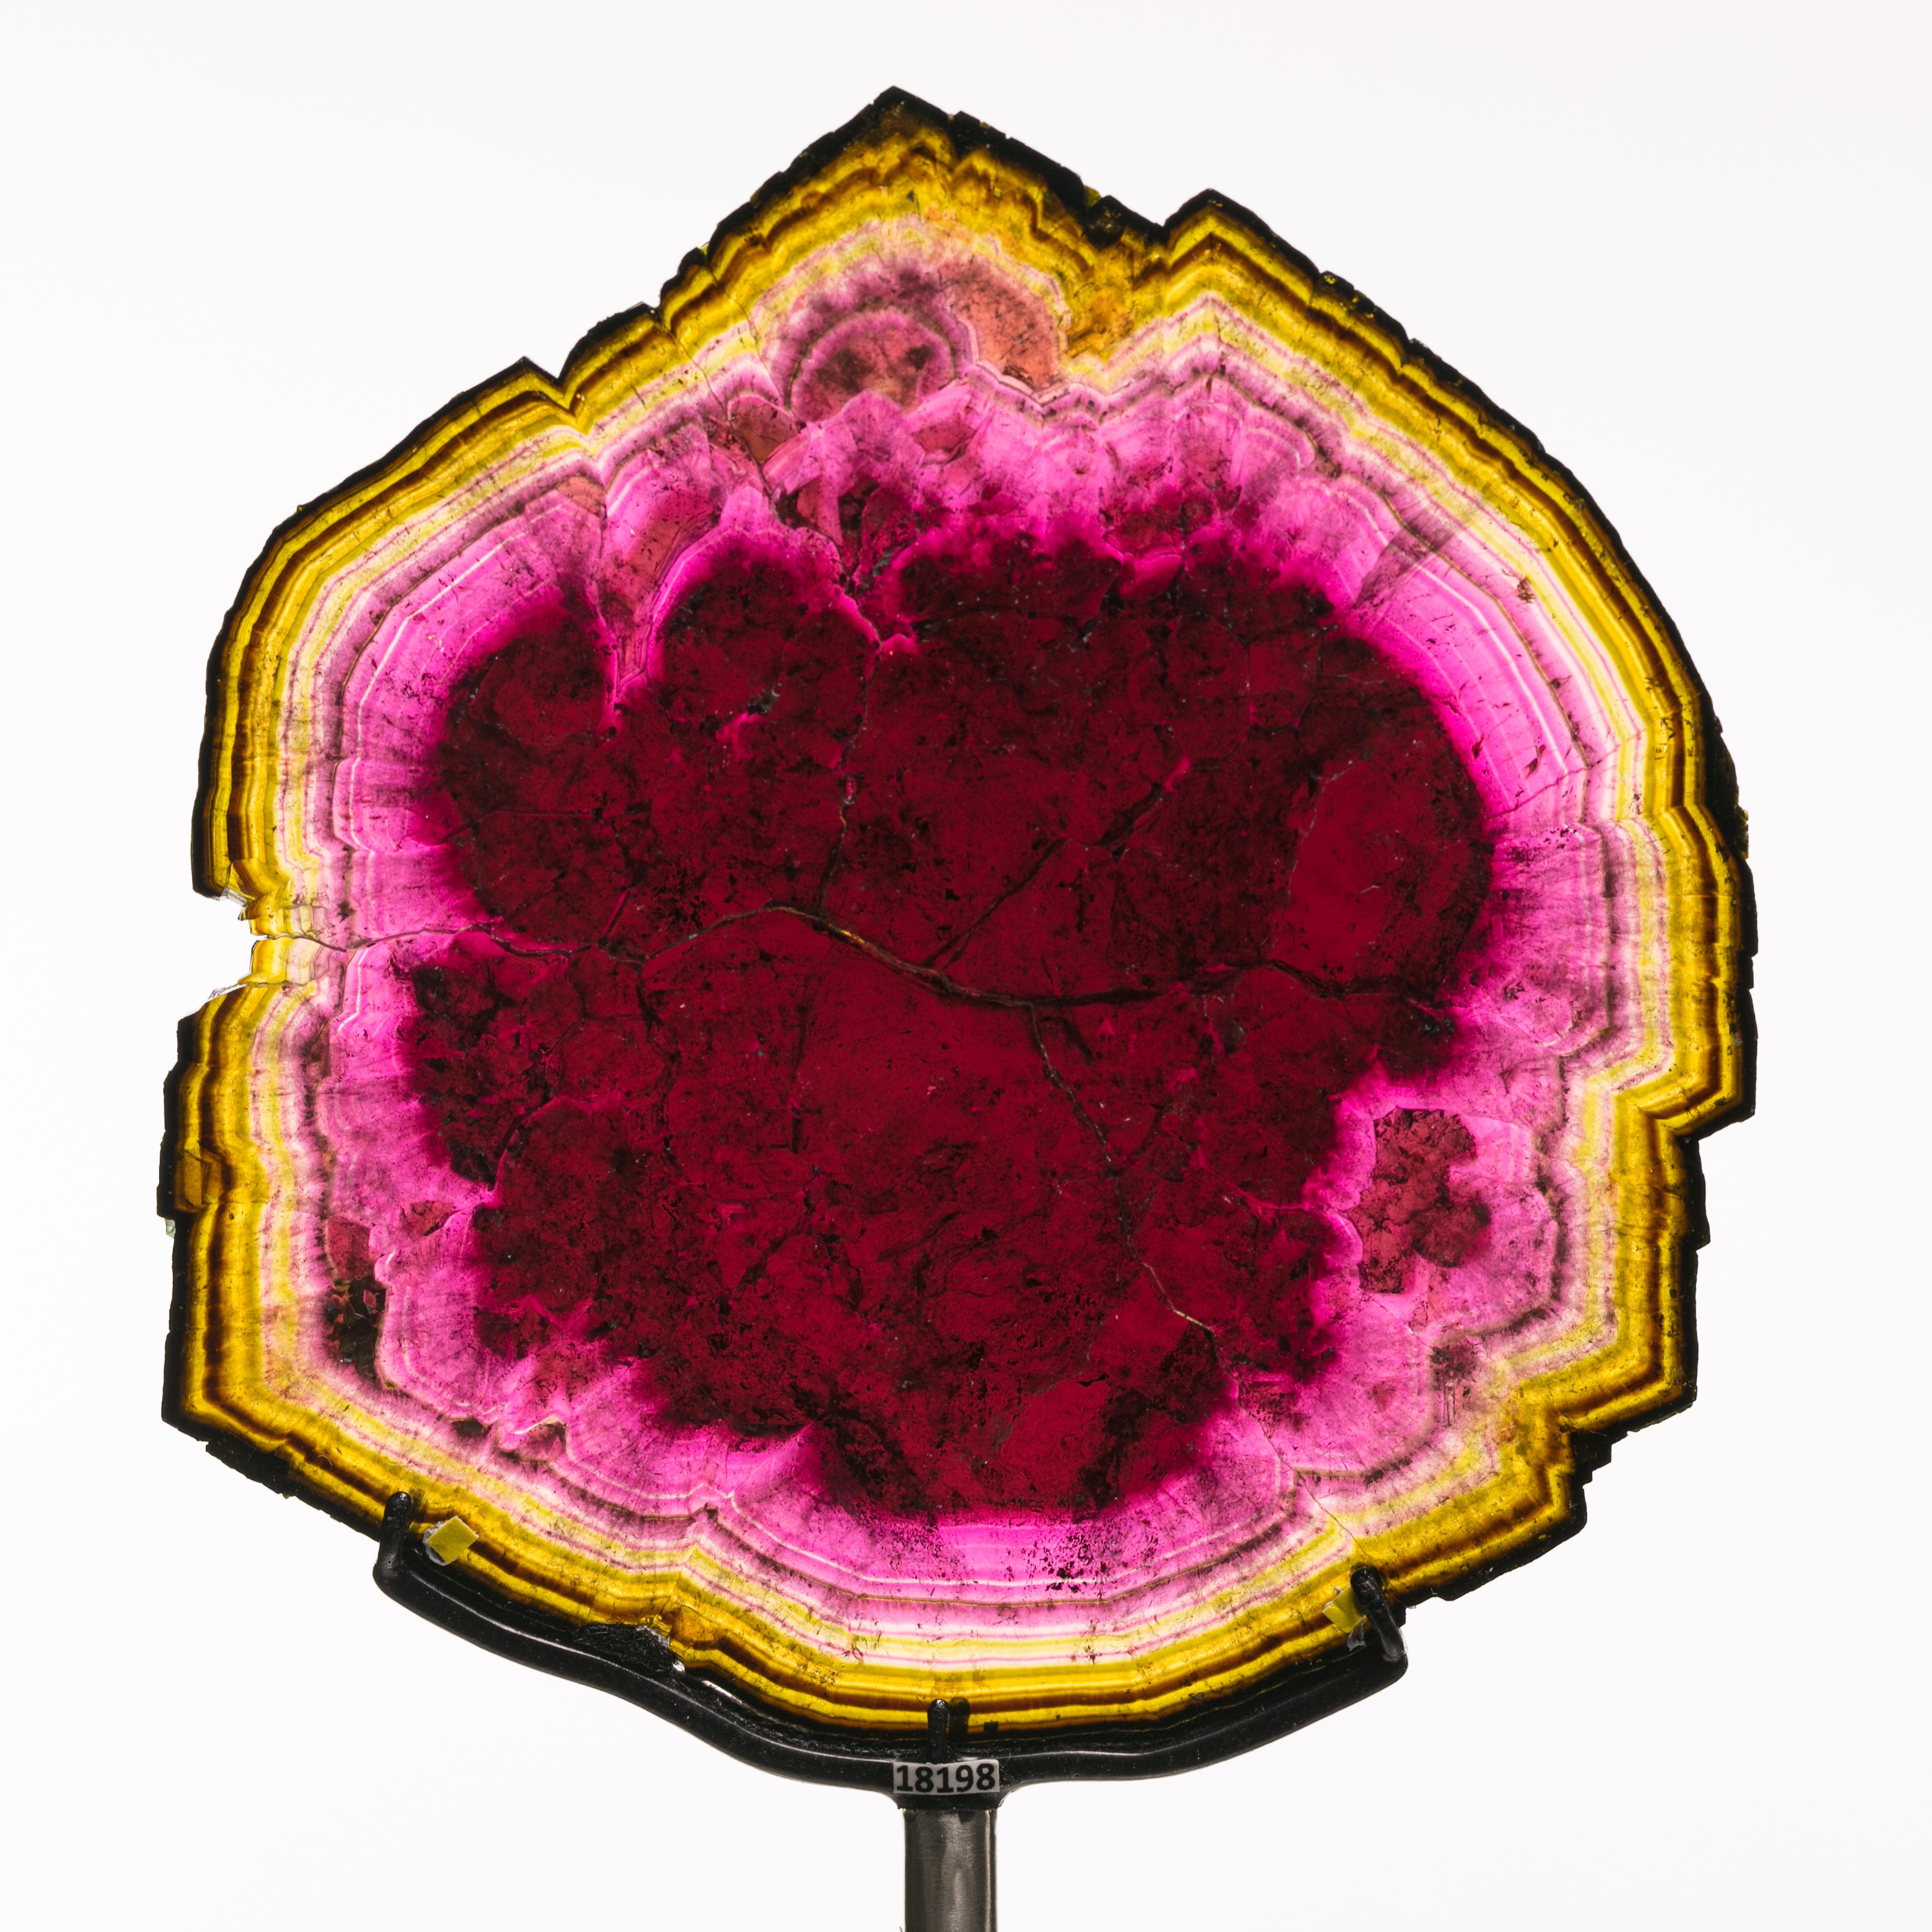 Tourmaline is celebrated not only for its vitreous beauty, but also for its unparalleled spectrum of colors and color combinations, earning its place among the most vibrant gemstones on Earth. What sets tourmaline apart is its ability to display